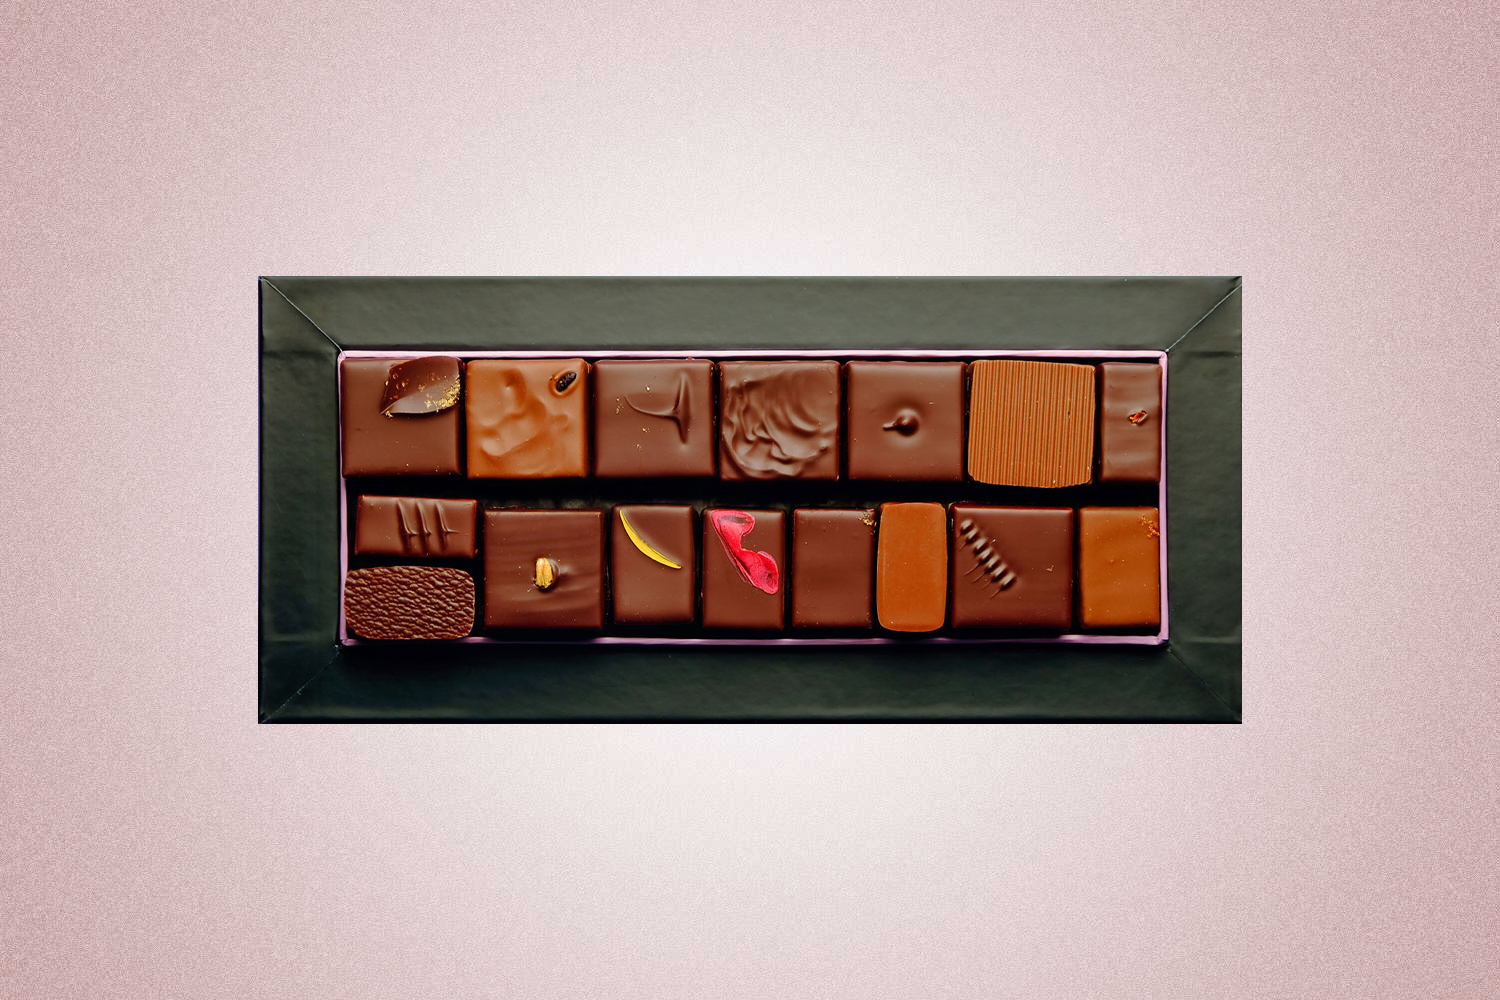 The Kreuther Signature Chef's Selection is one of the best Valentine's Day chocolates for those looking to spice things up on Valentine's Day in 2022